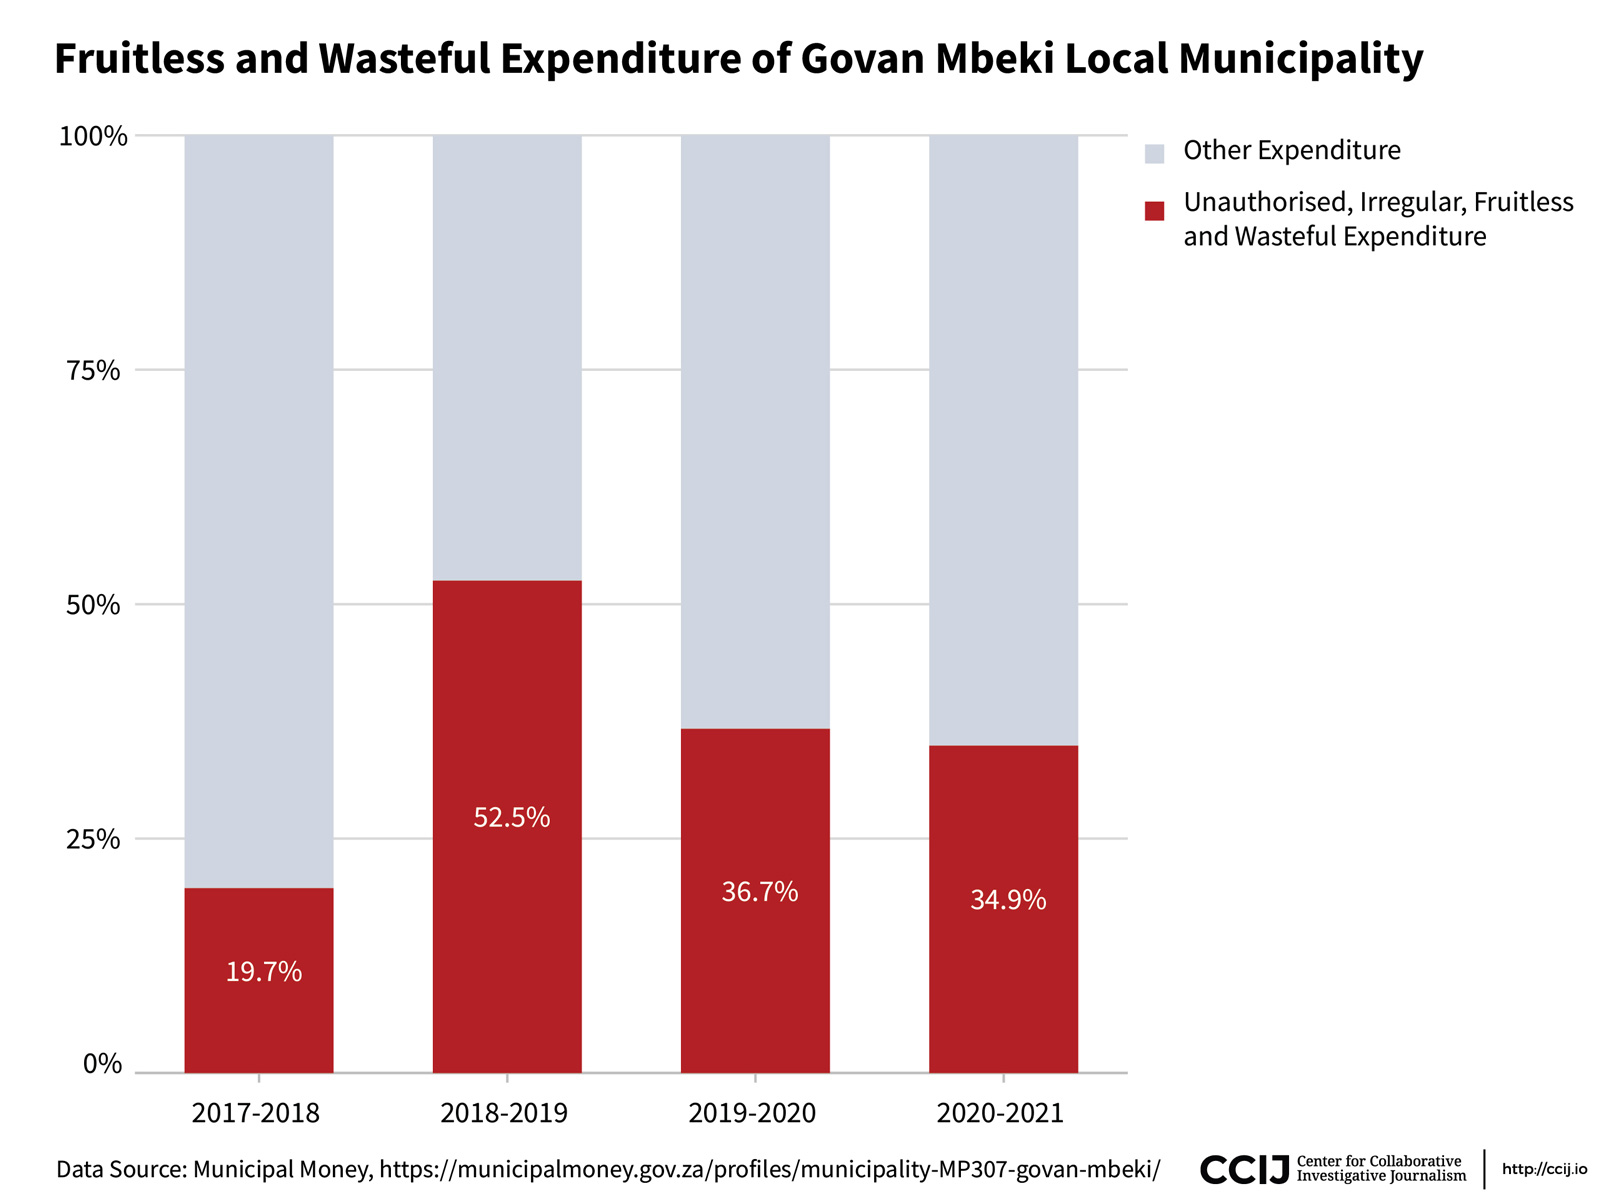 Fruitless and wasteful expenditure of Govan Mbeki local municipality